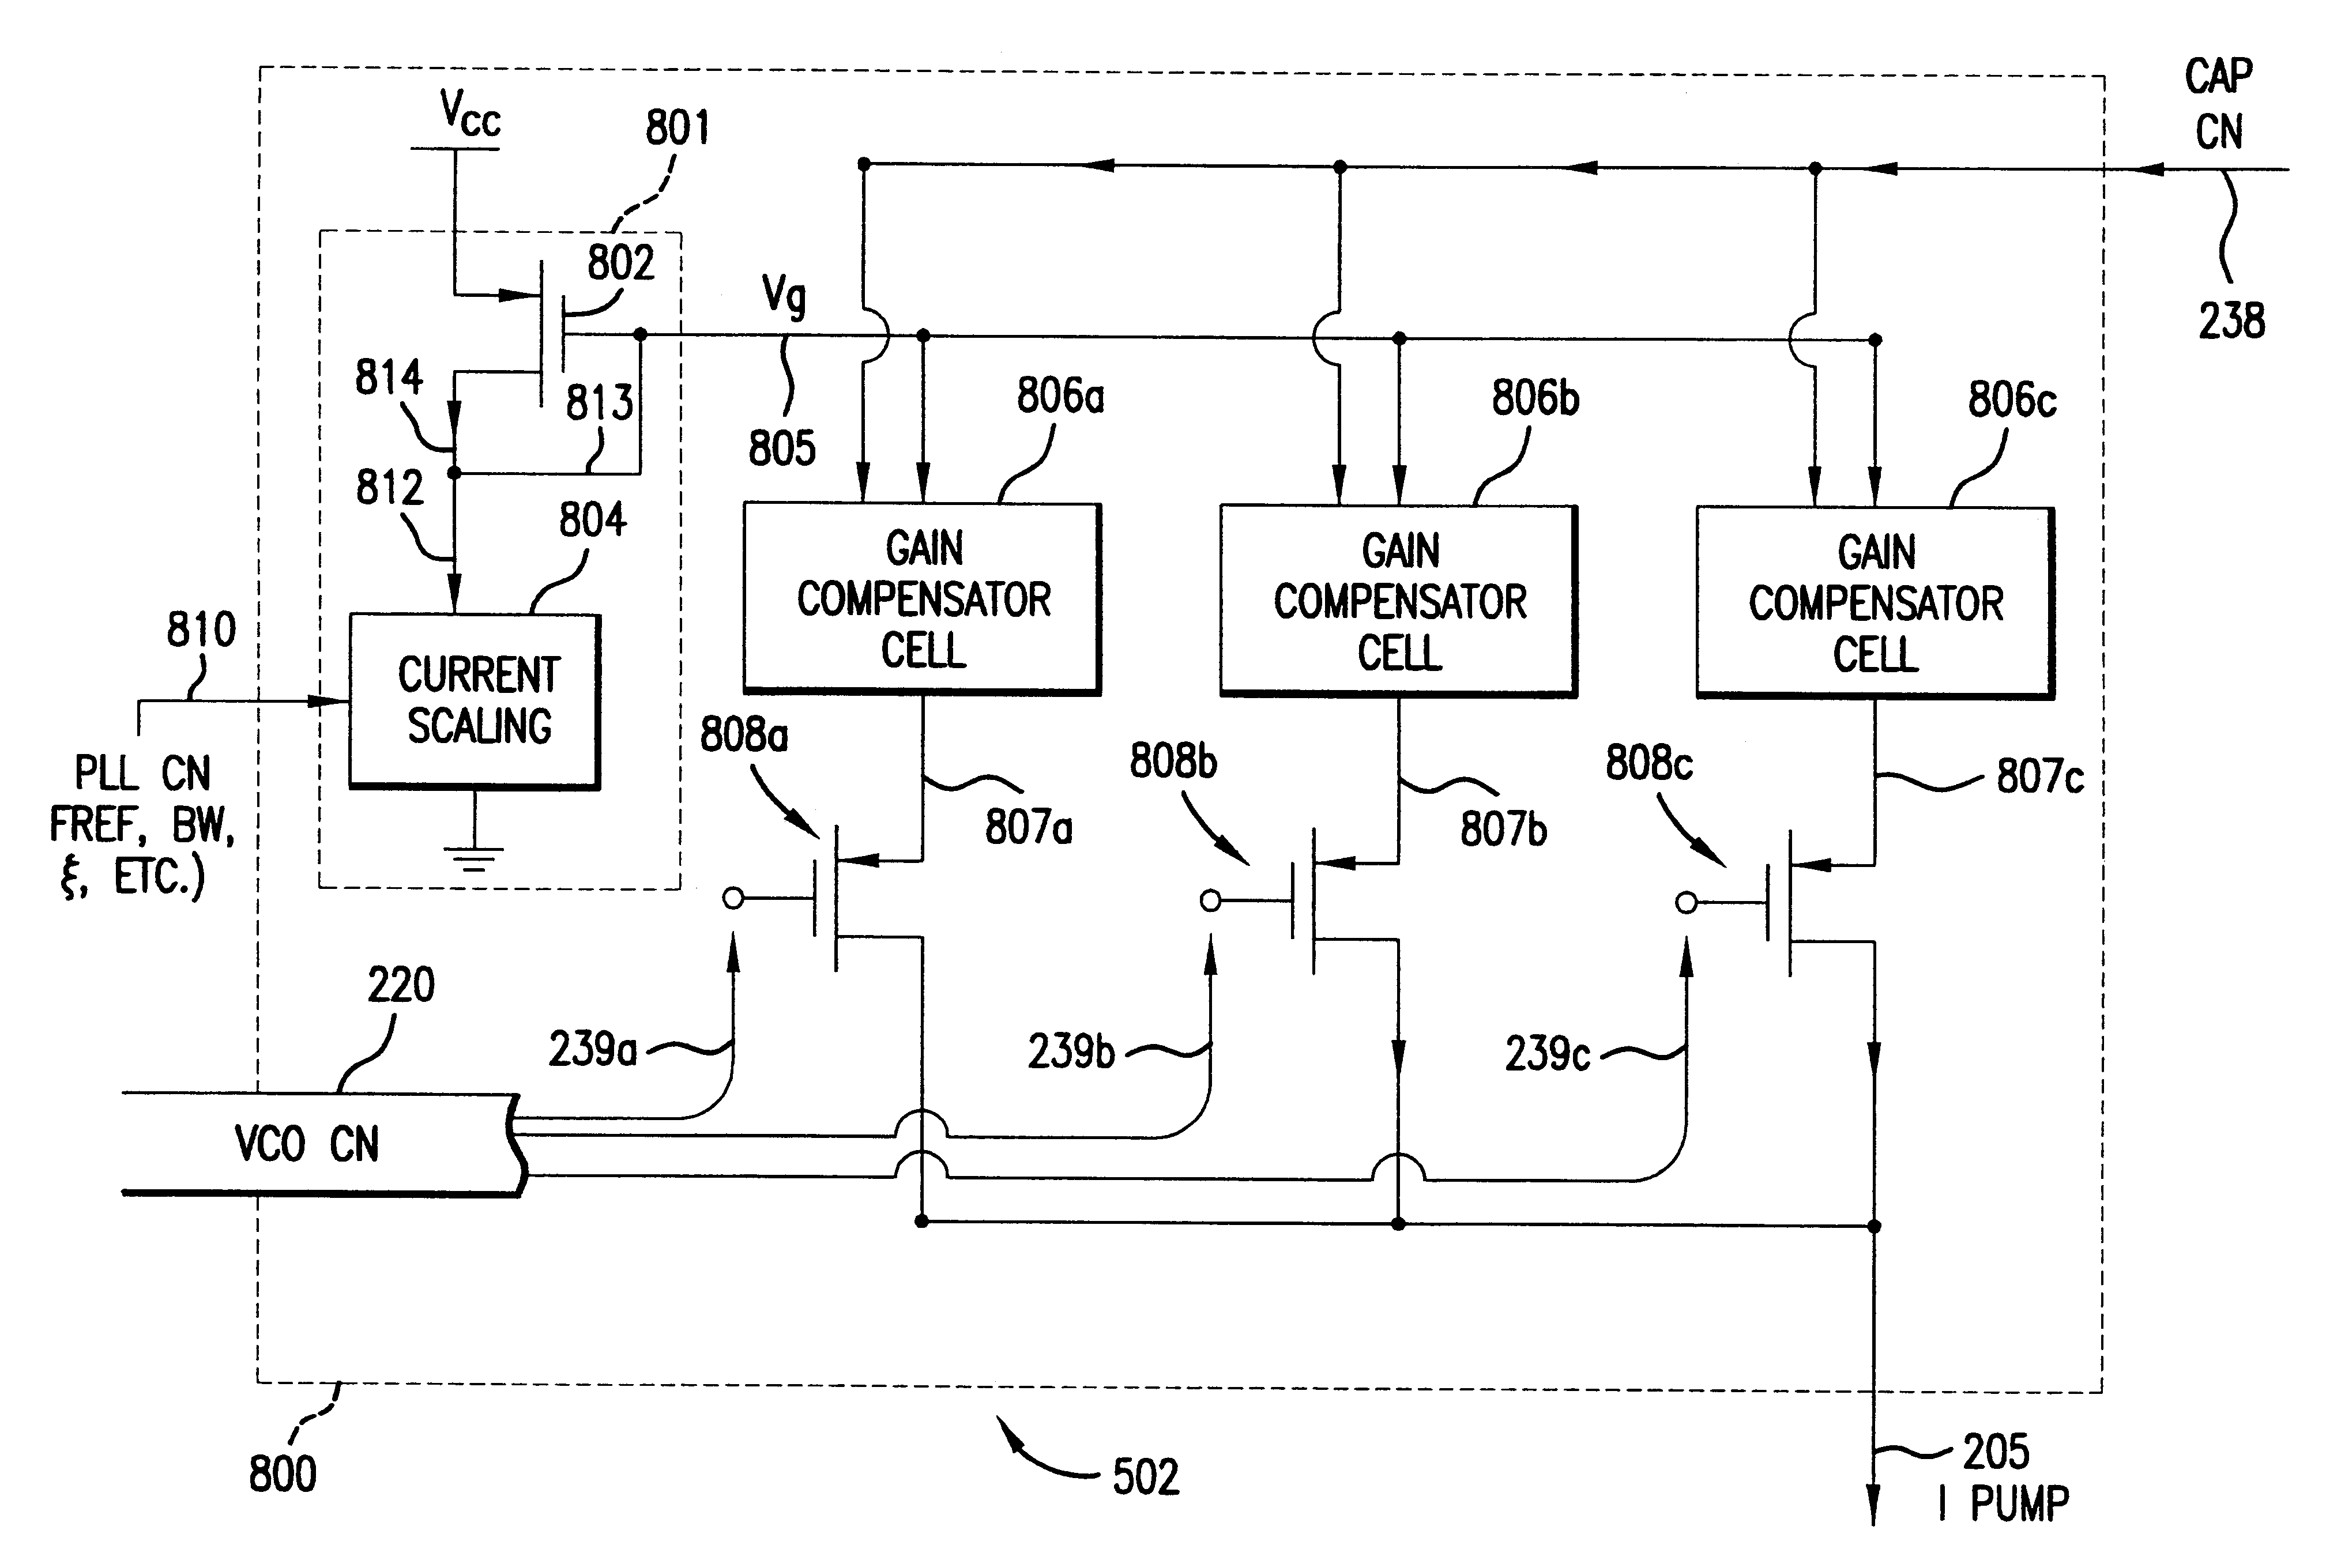 Apparatus and method for phase lock loop gain control using unit current sources